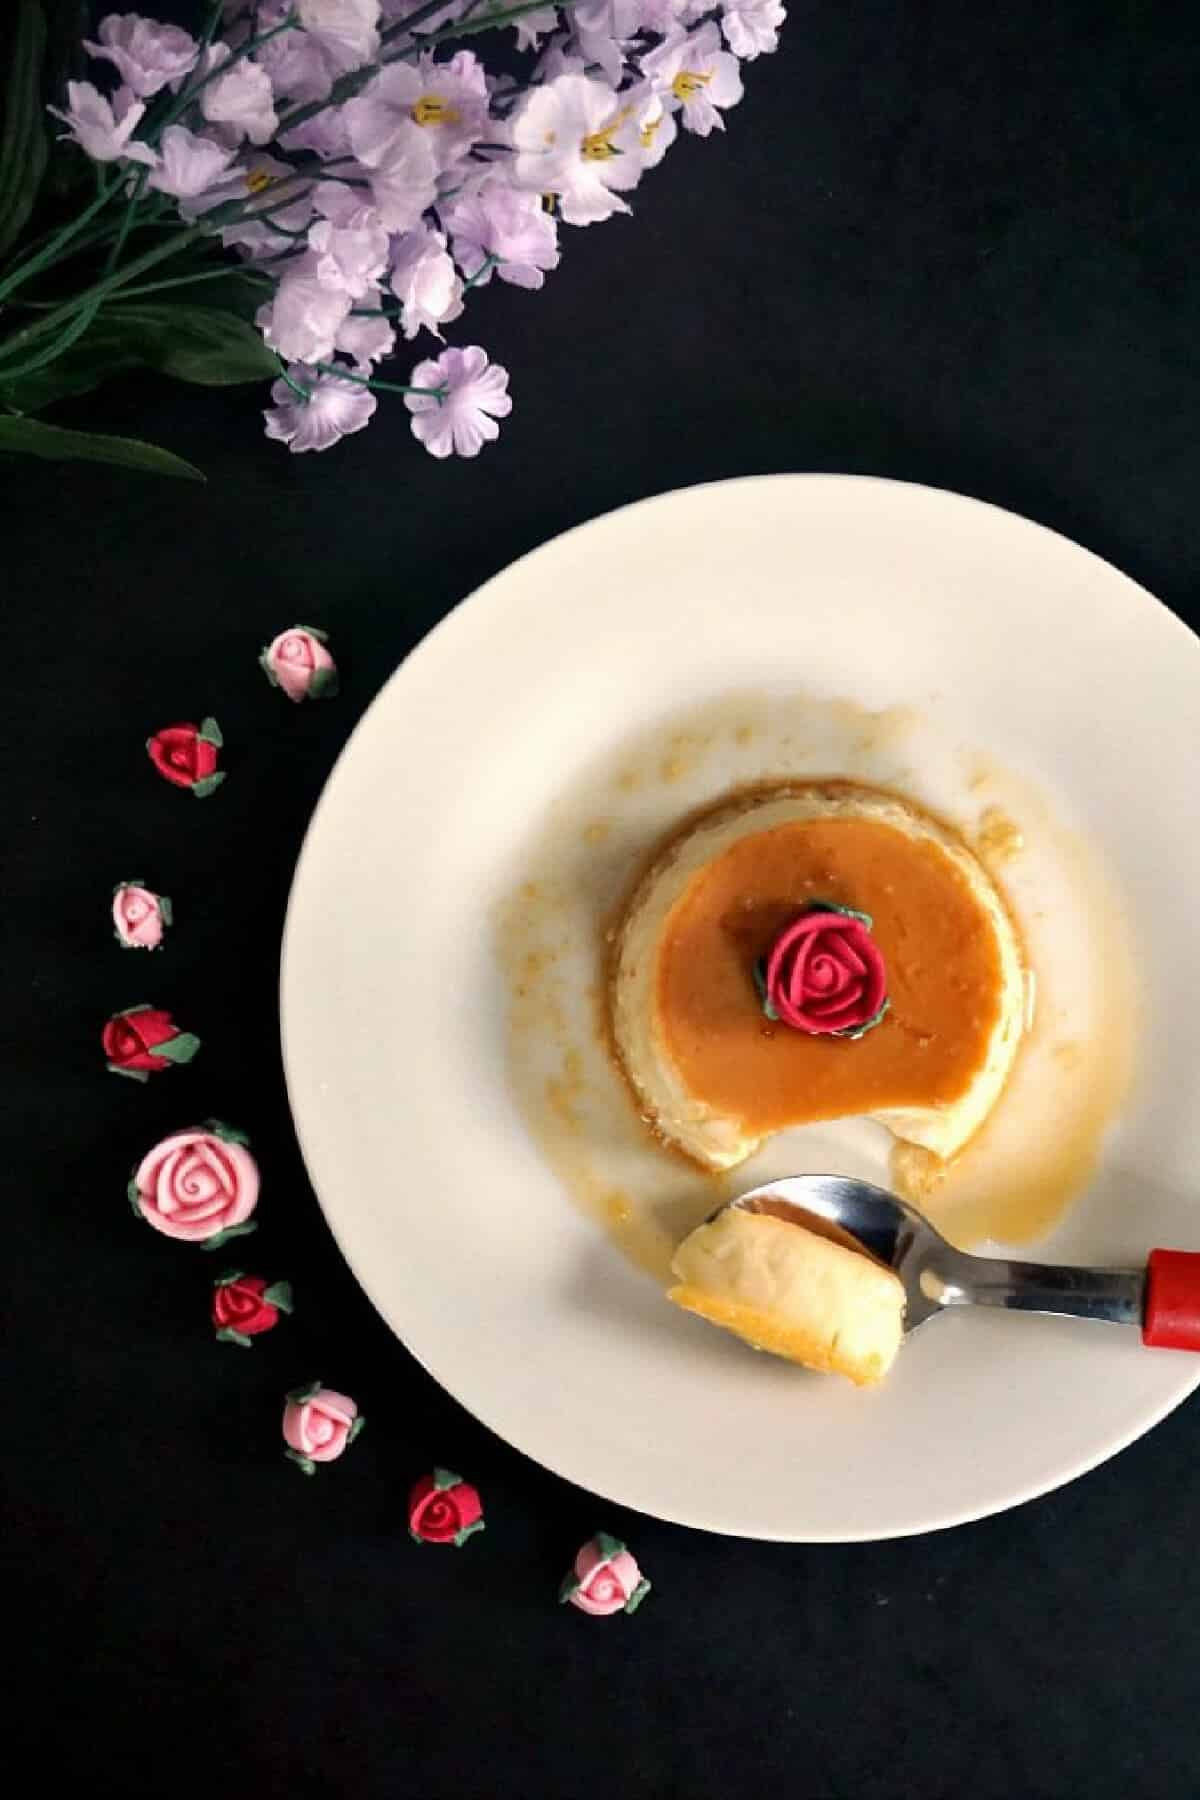 A white plate with a portion of flan topped with a rose.